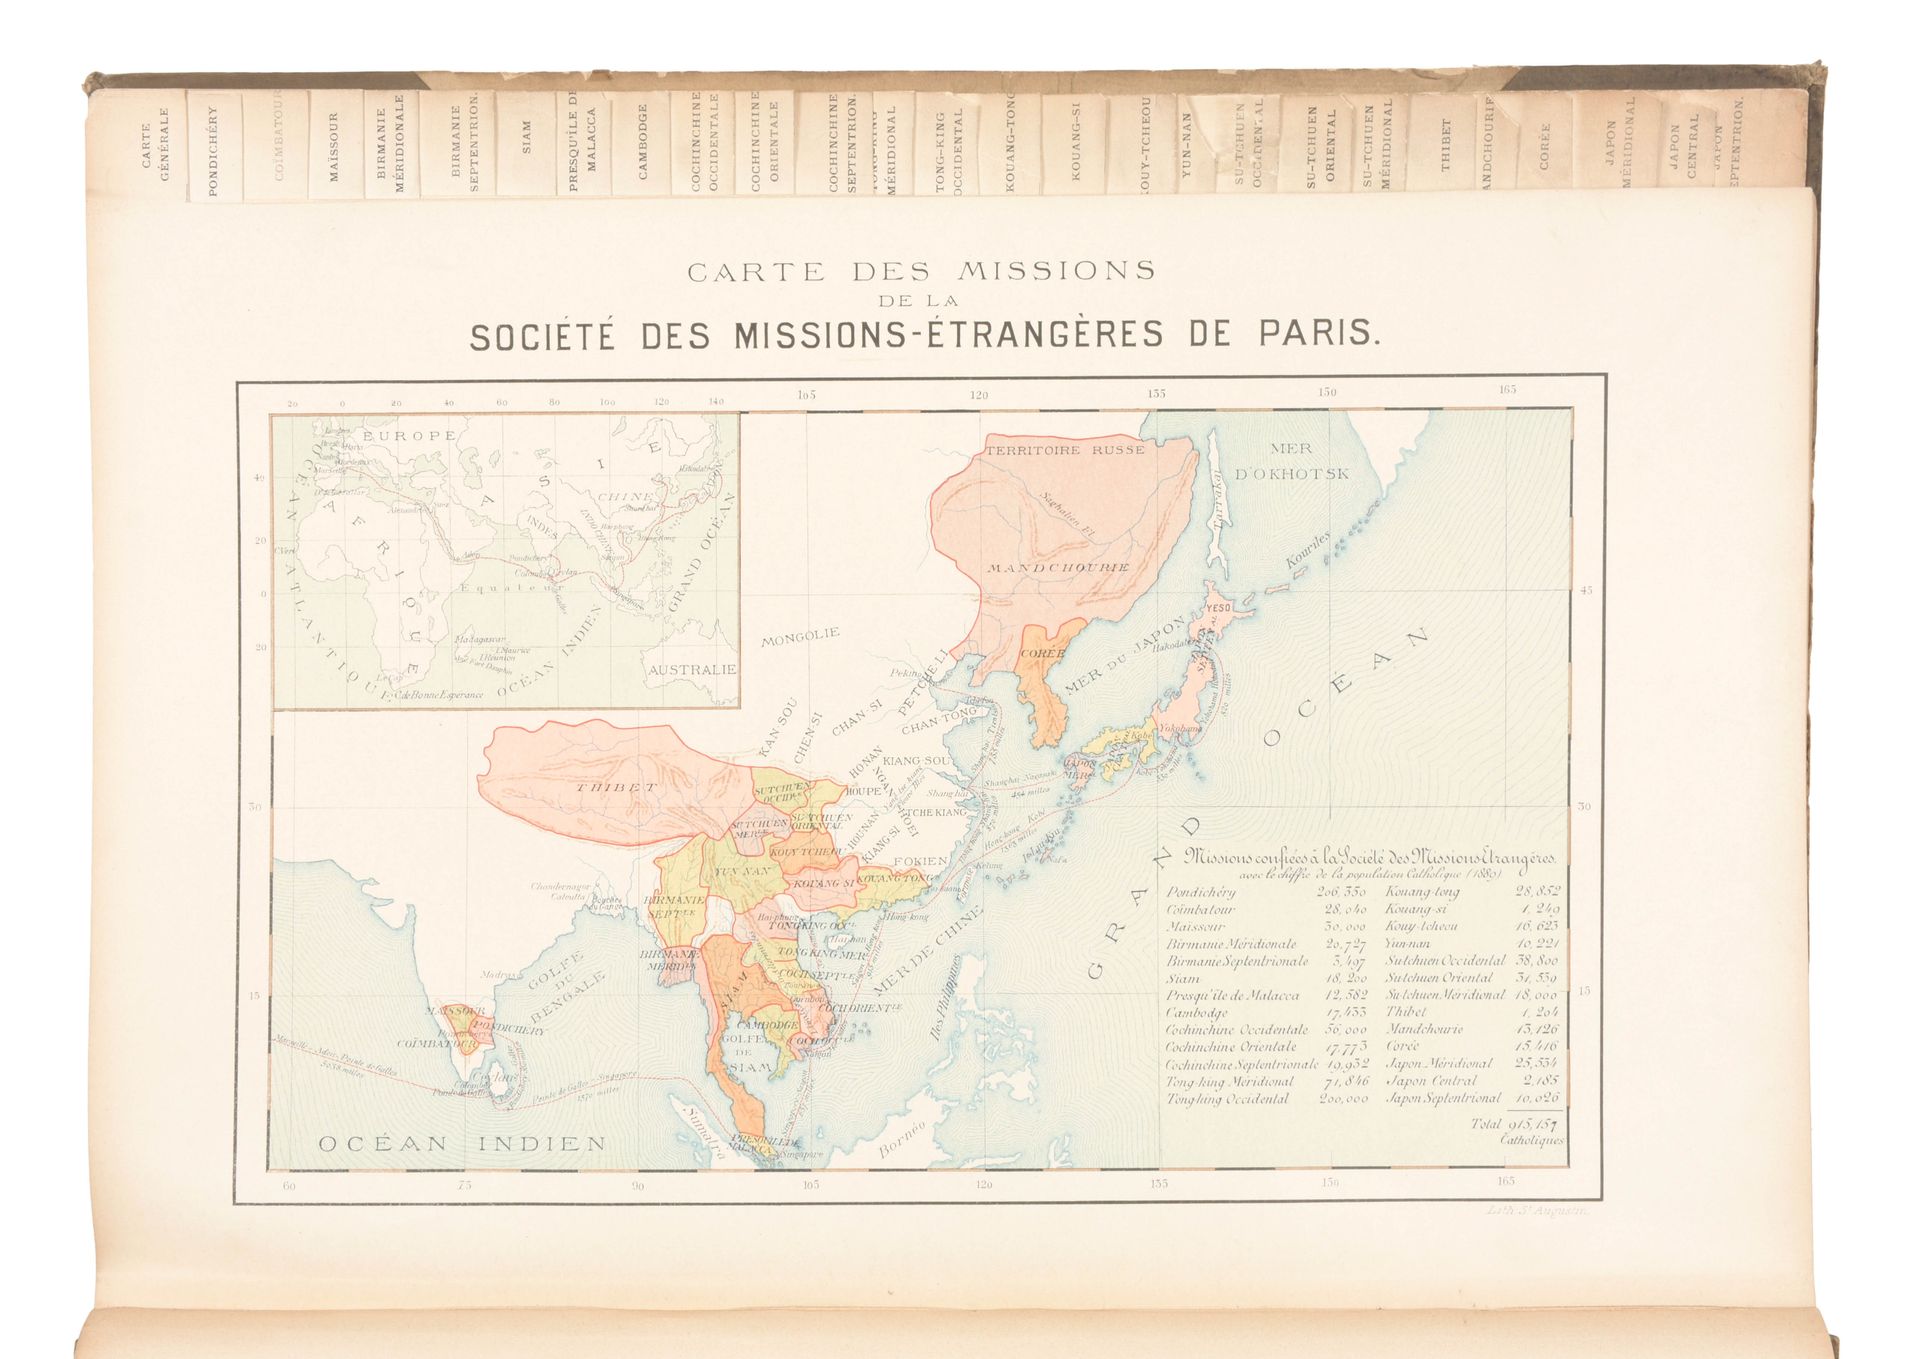 LAUNAY, Adrien 外国传教士协会传教士地图集》（Atlas of the Missions of the Society of Foreign Mi&hellip;